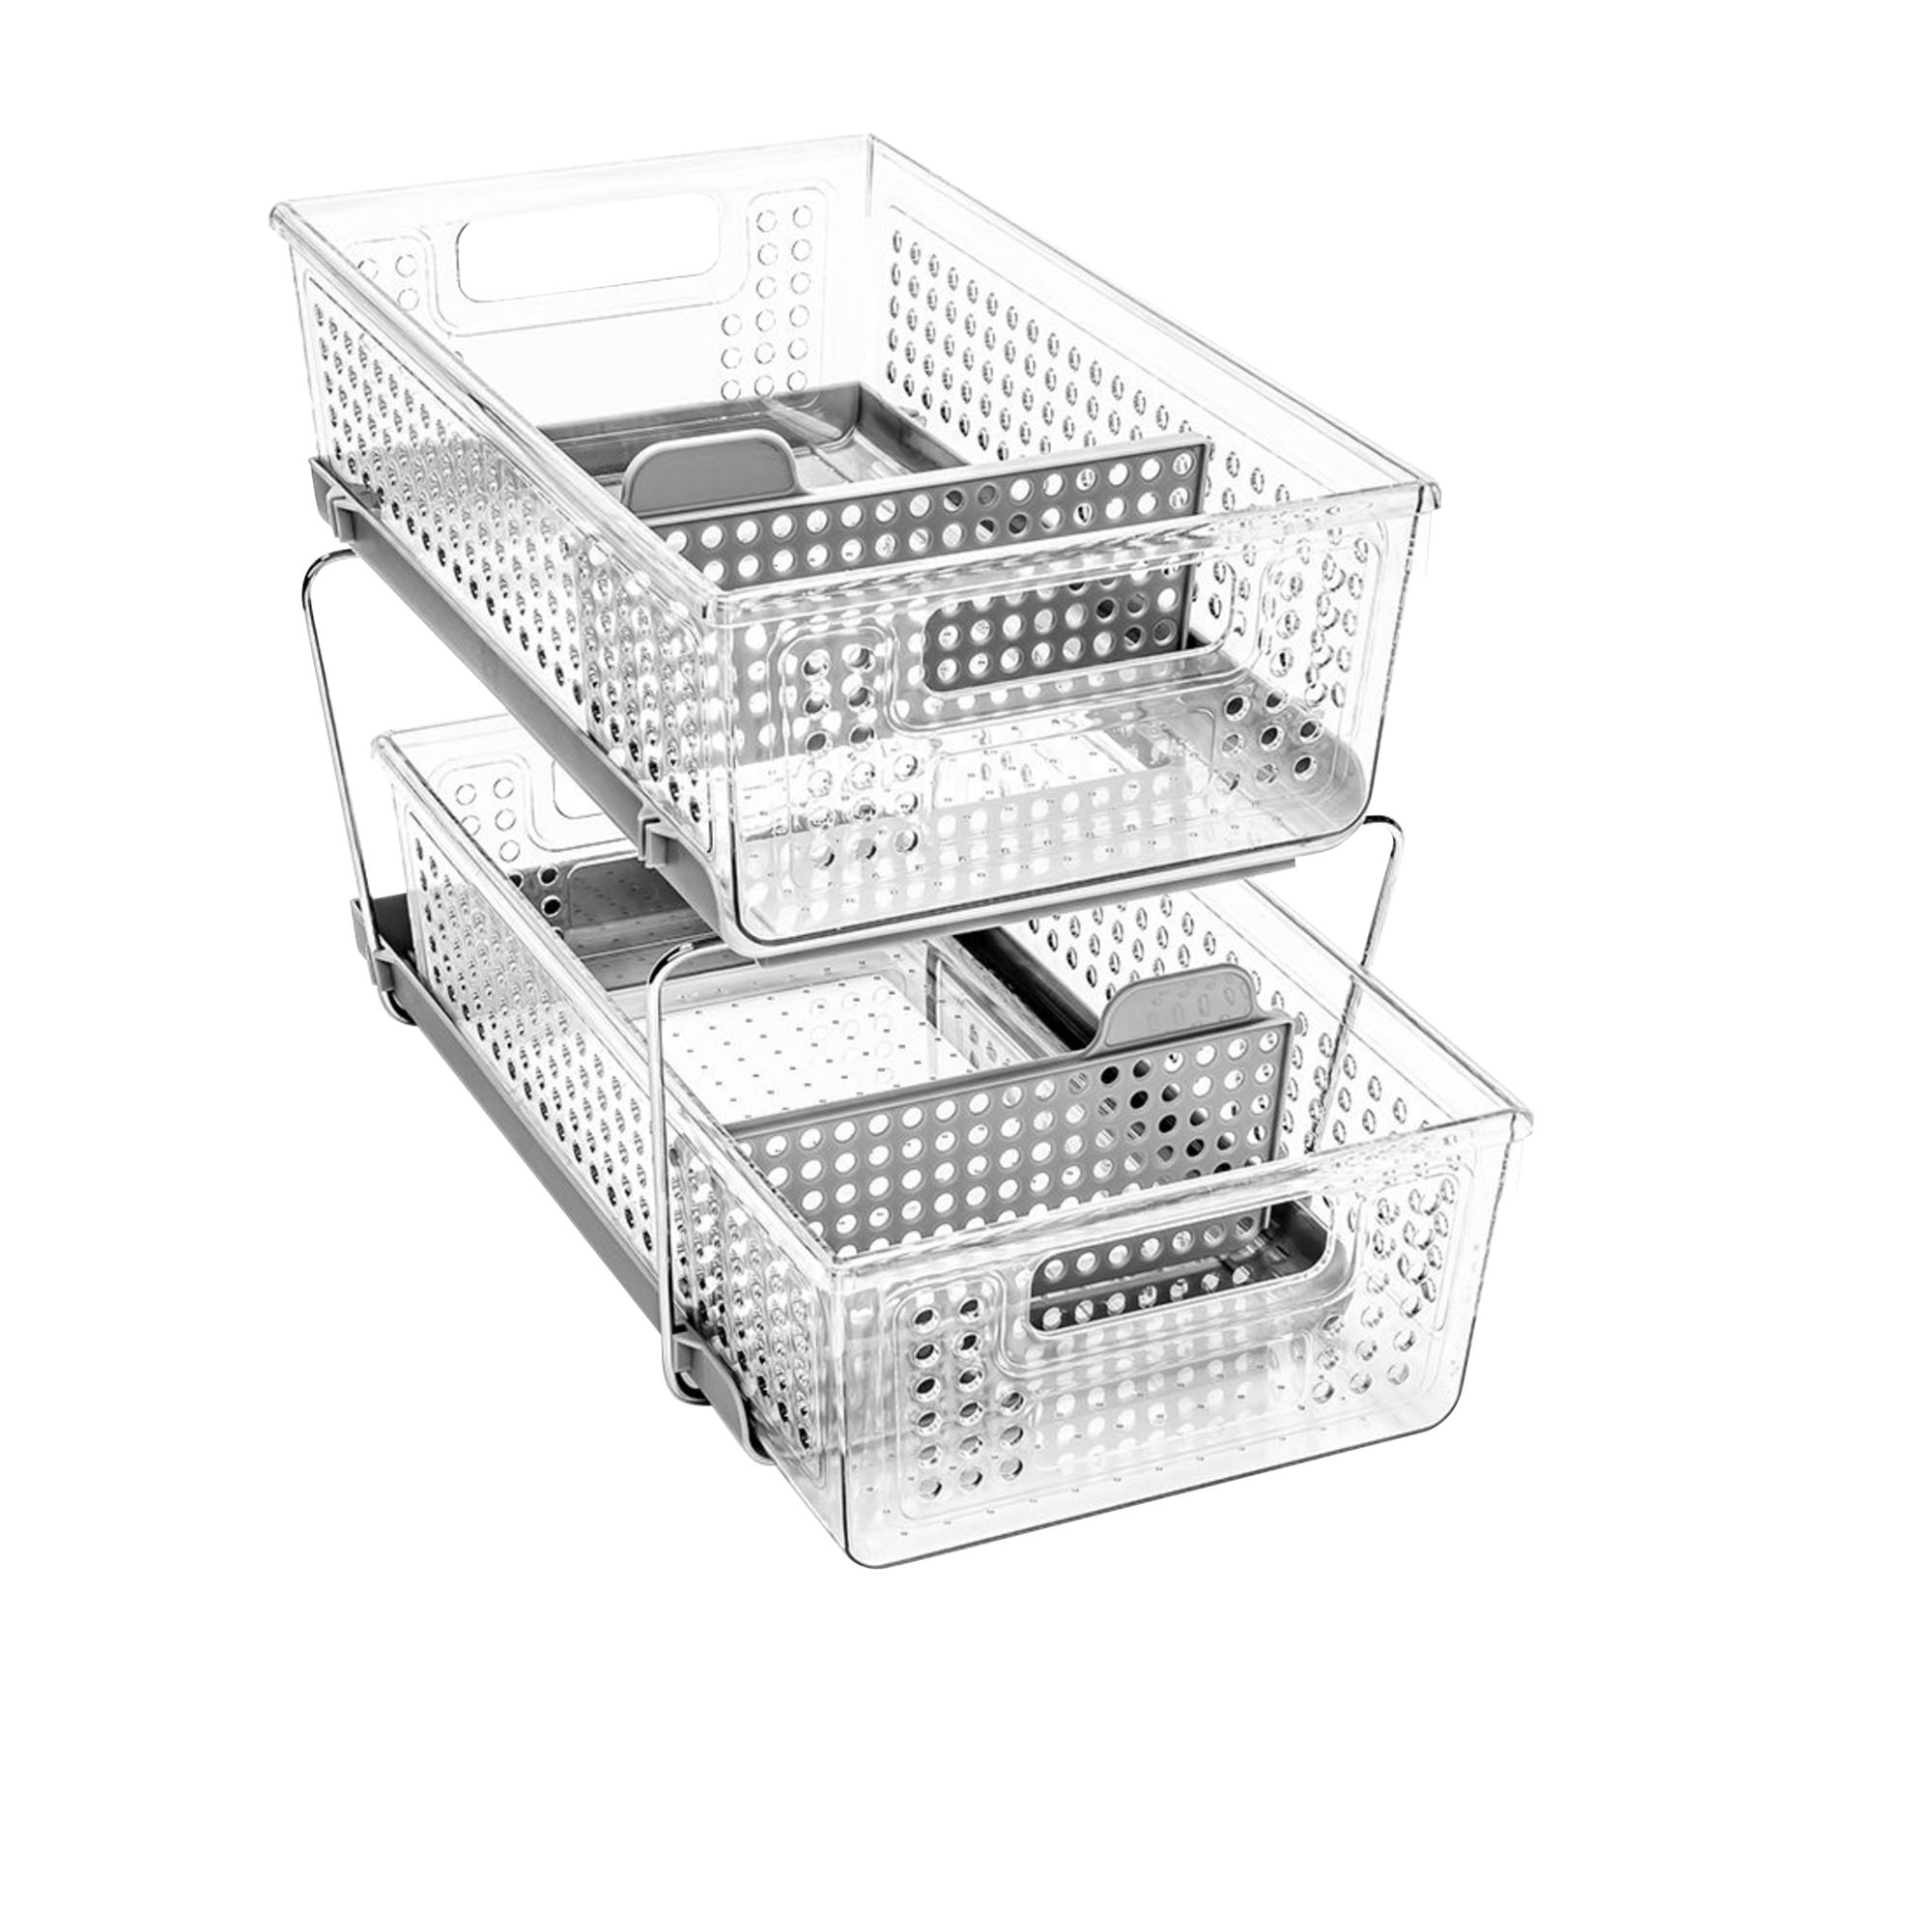 Madesmart 2 Tier Storage Organiser with Dividers Clear Image 1